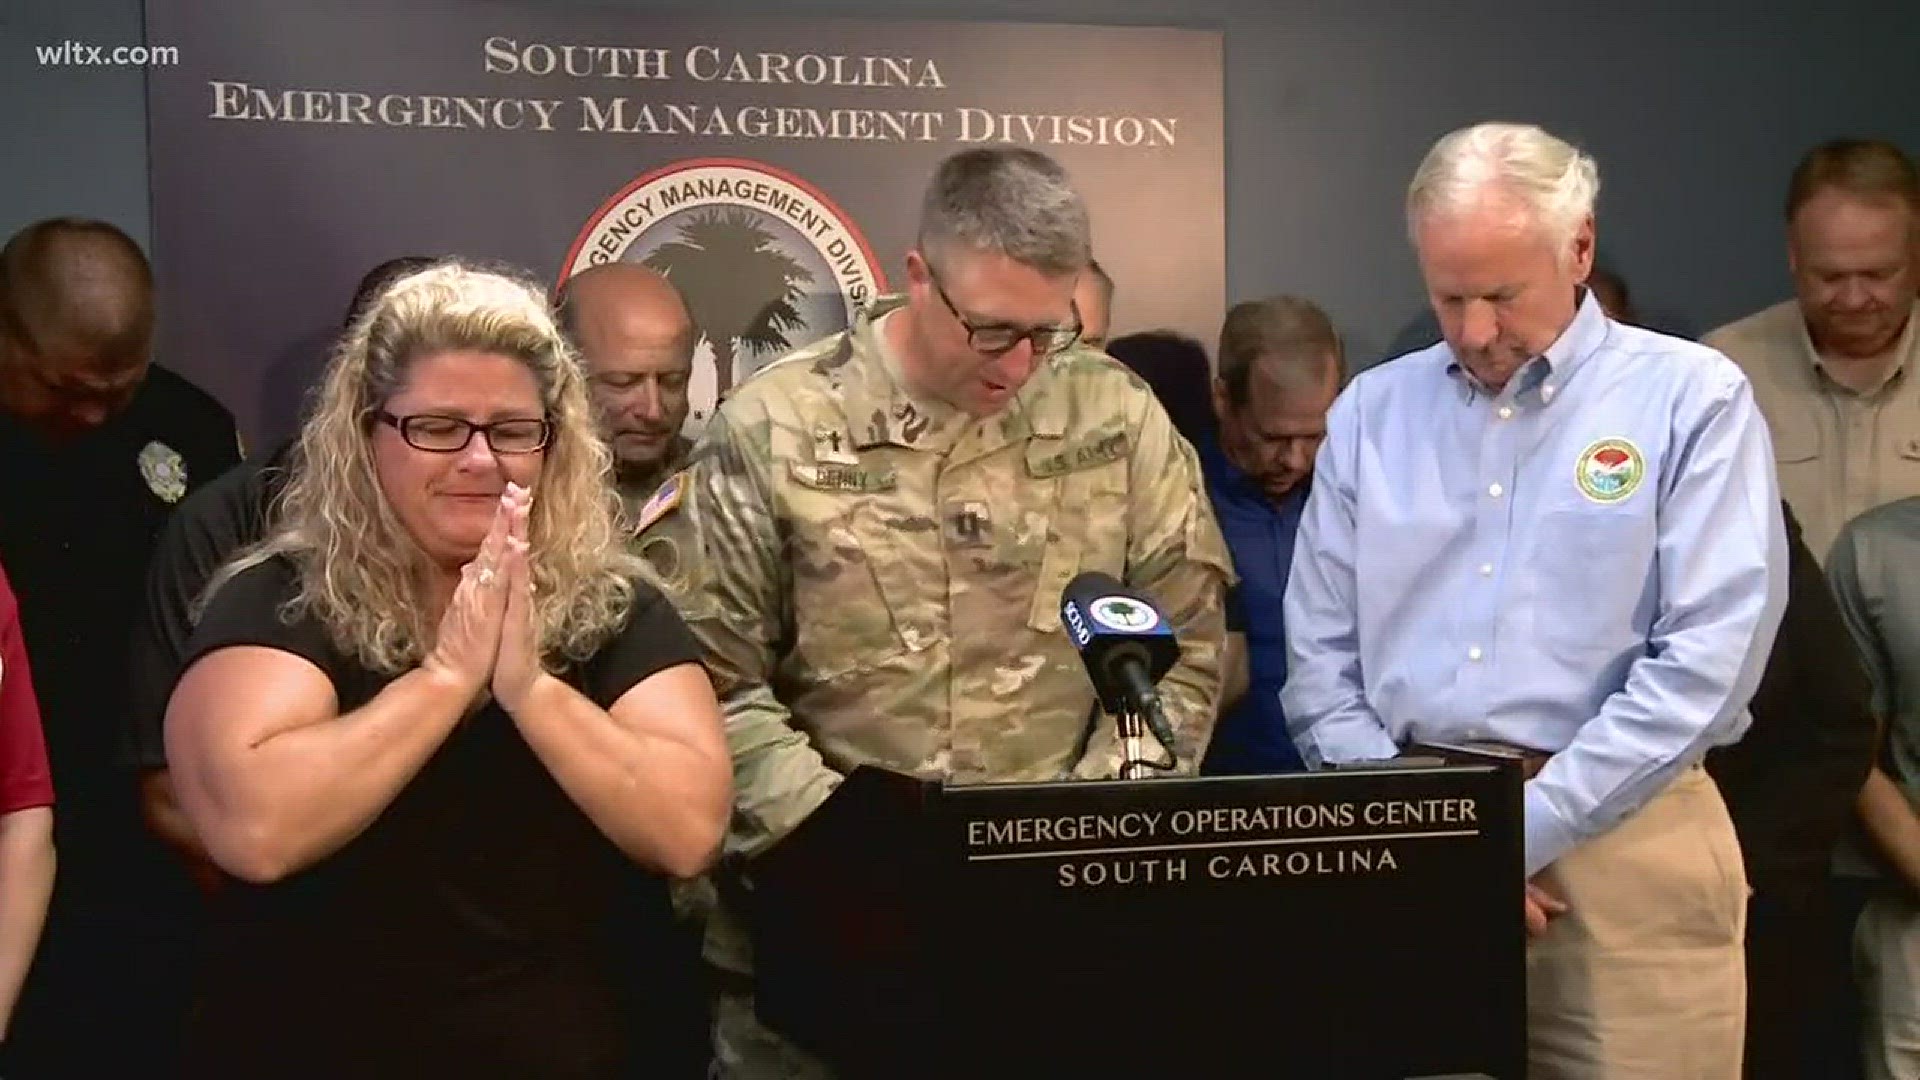 South Carolina officials bowed their heads in prayer before a news conference on their preparations for Hurricane Florence.